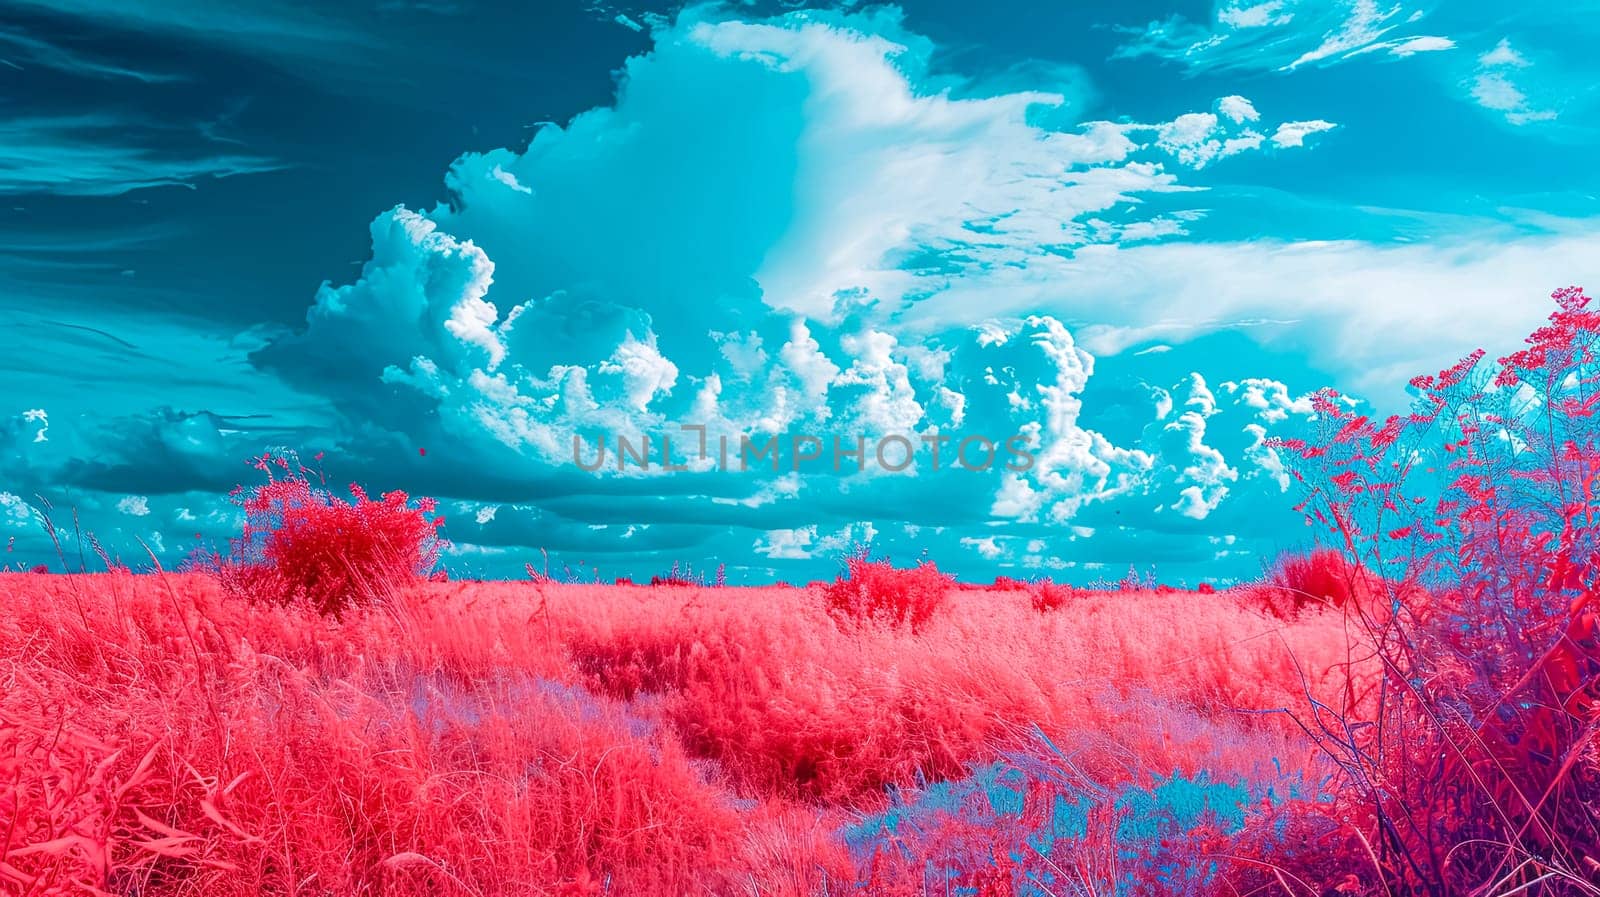 Infrared landscape with radiant red foliage under a surreal cyan sky with fluffy clouds. by Edophoto